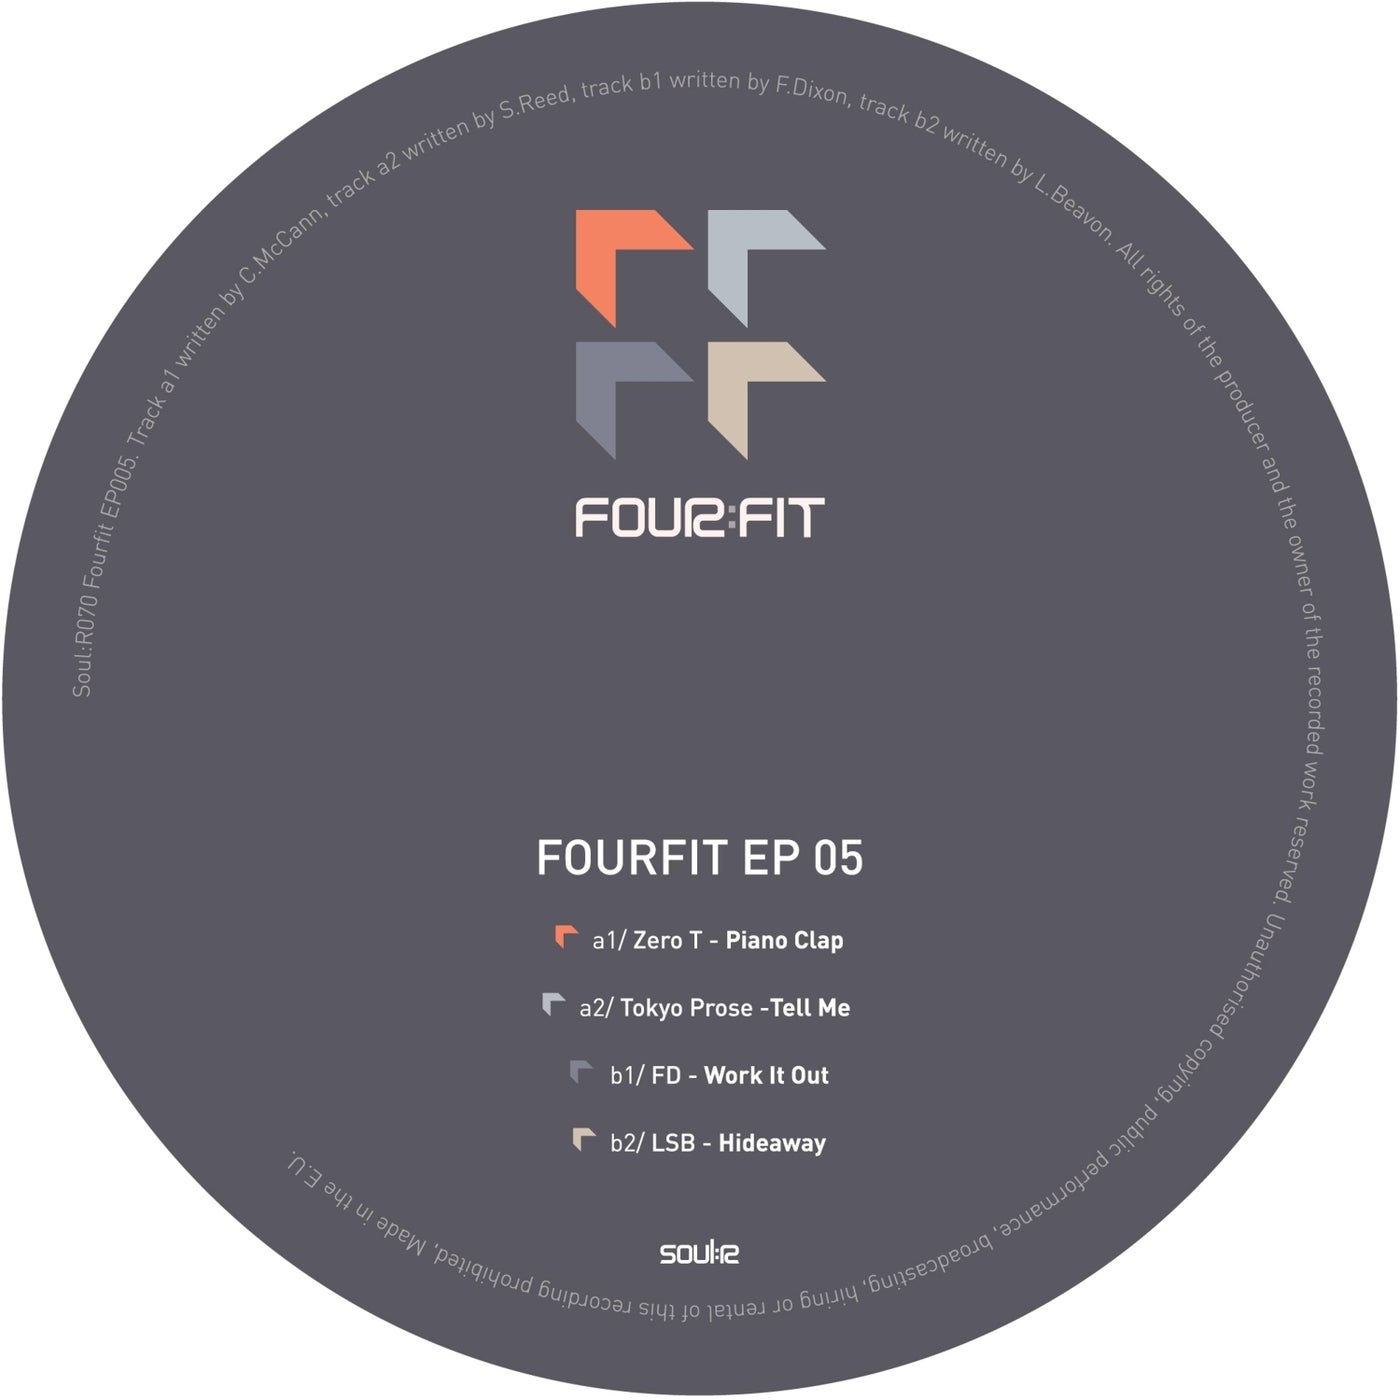 Fourfit EP 05